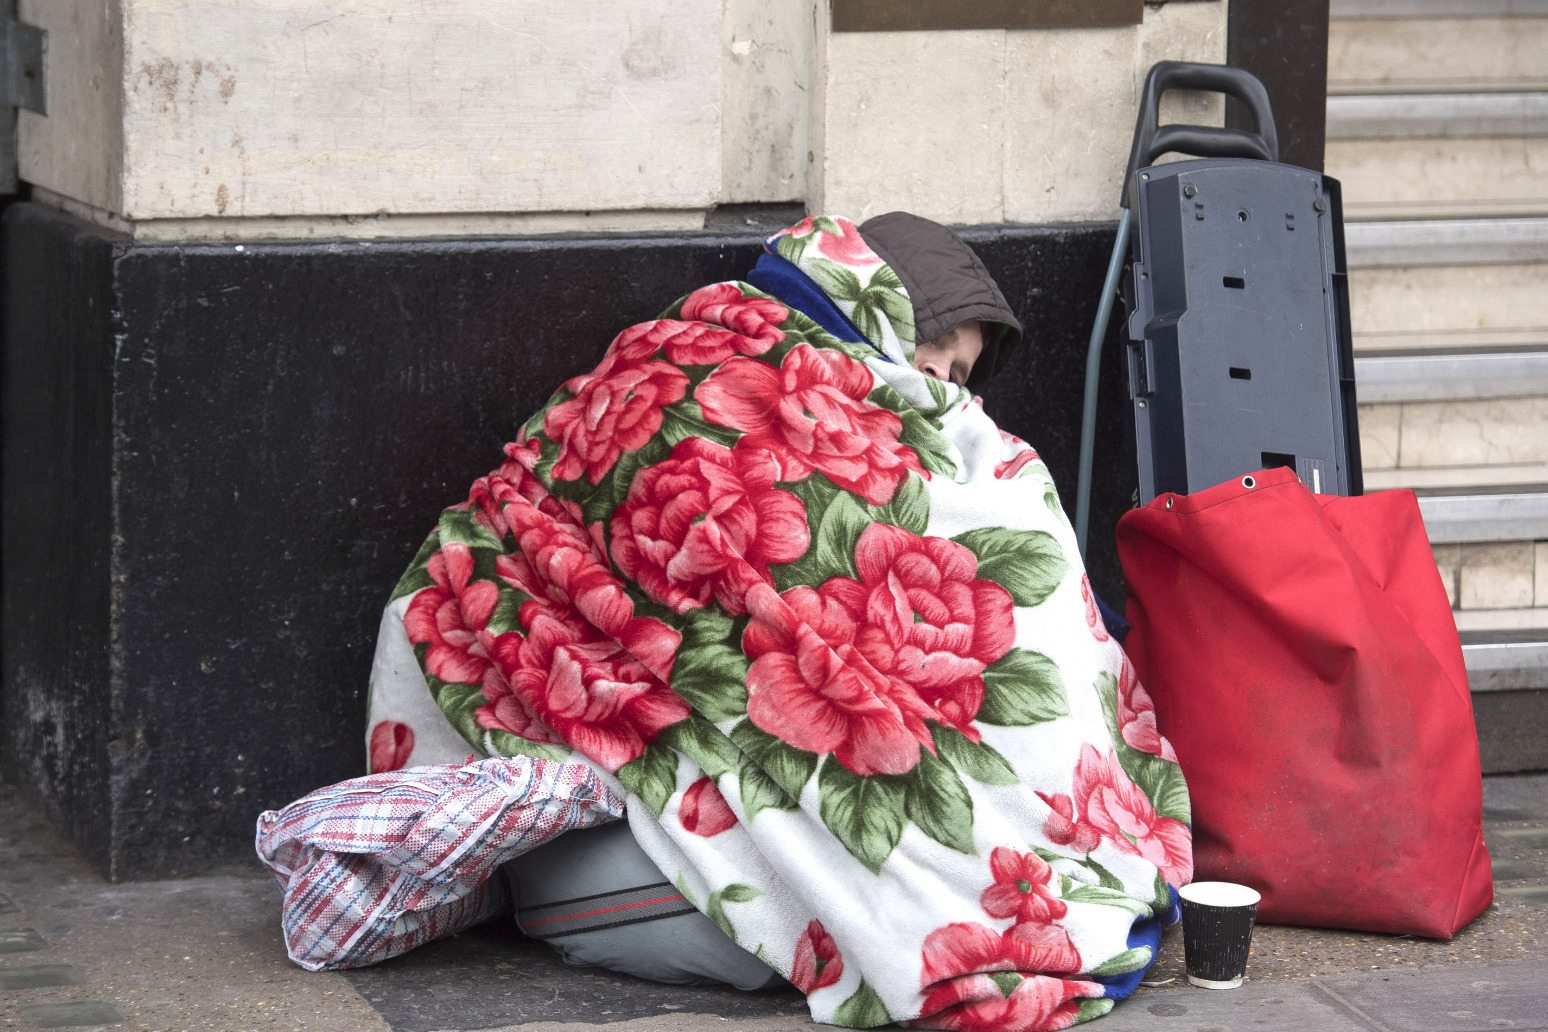 316 million pounds to tackle homelessness announced 